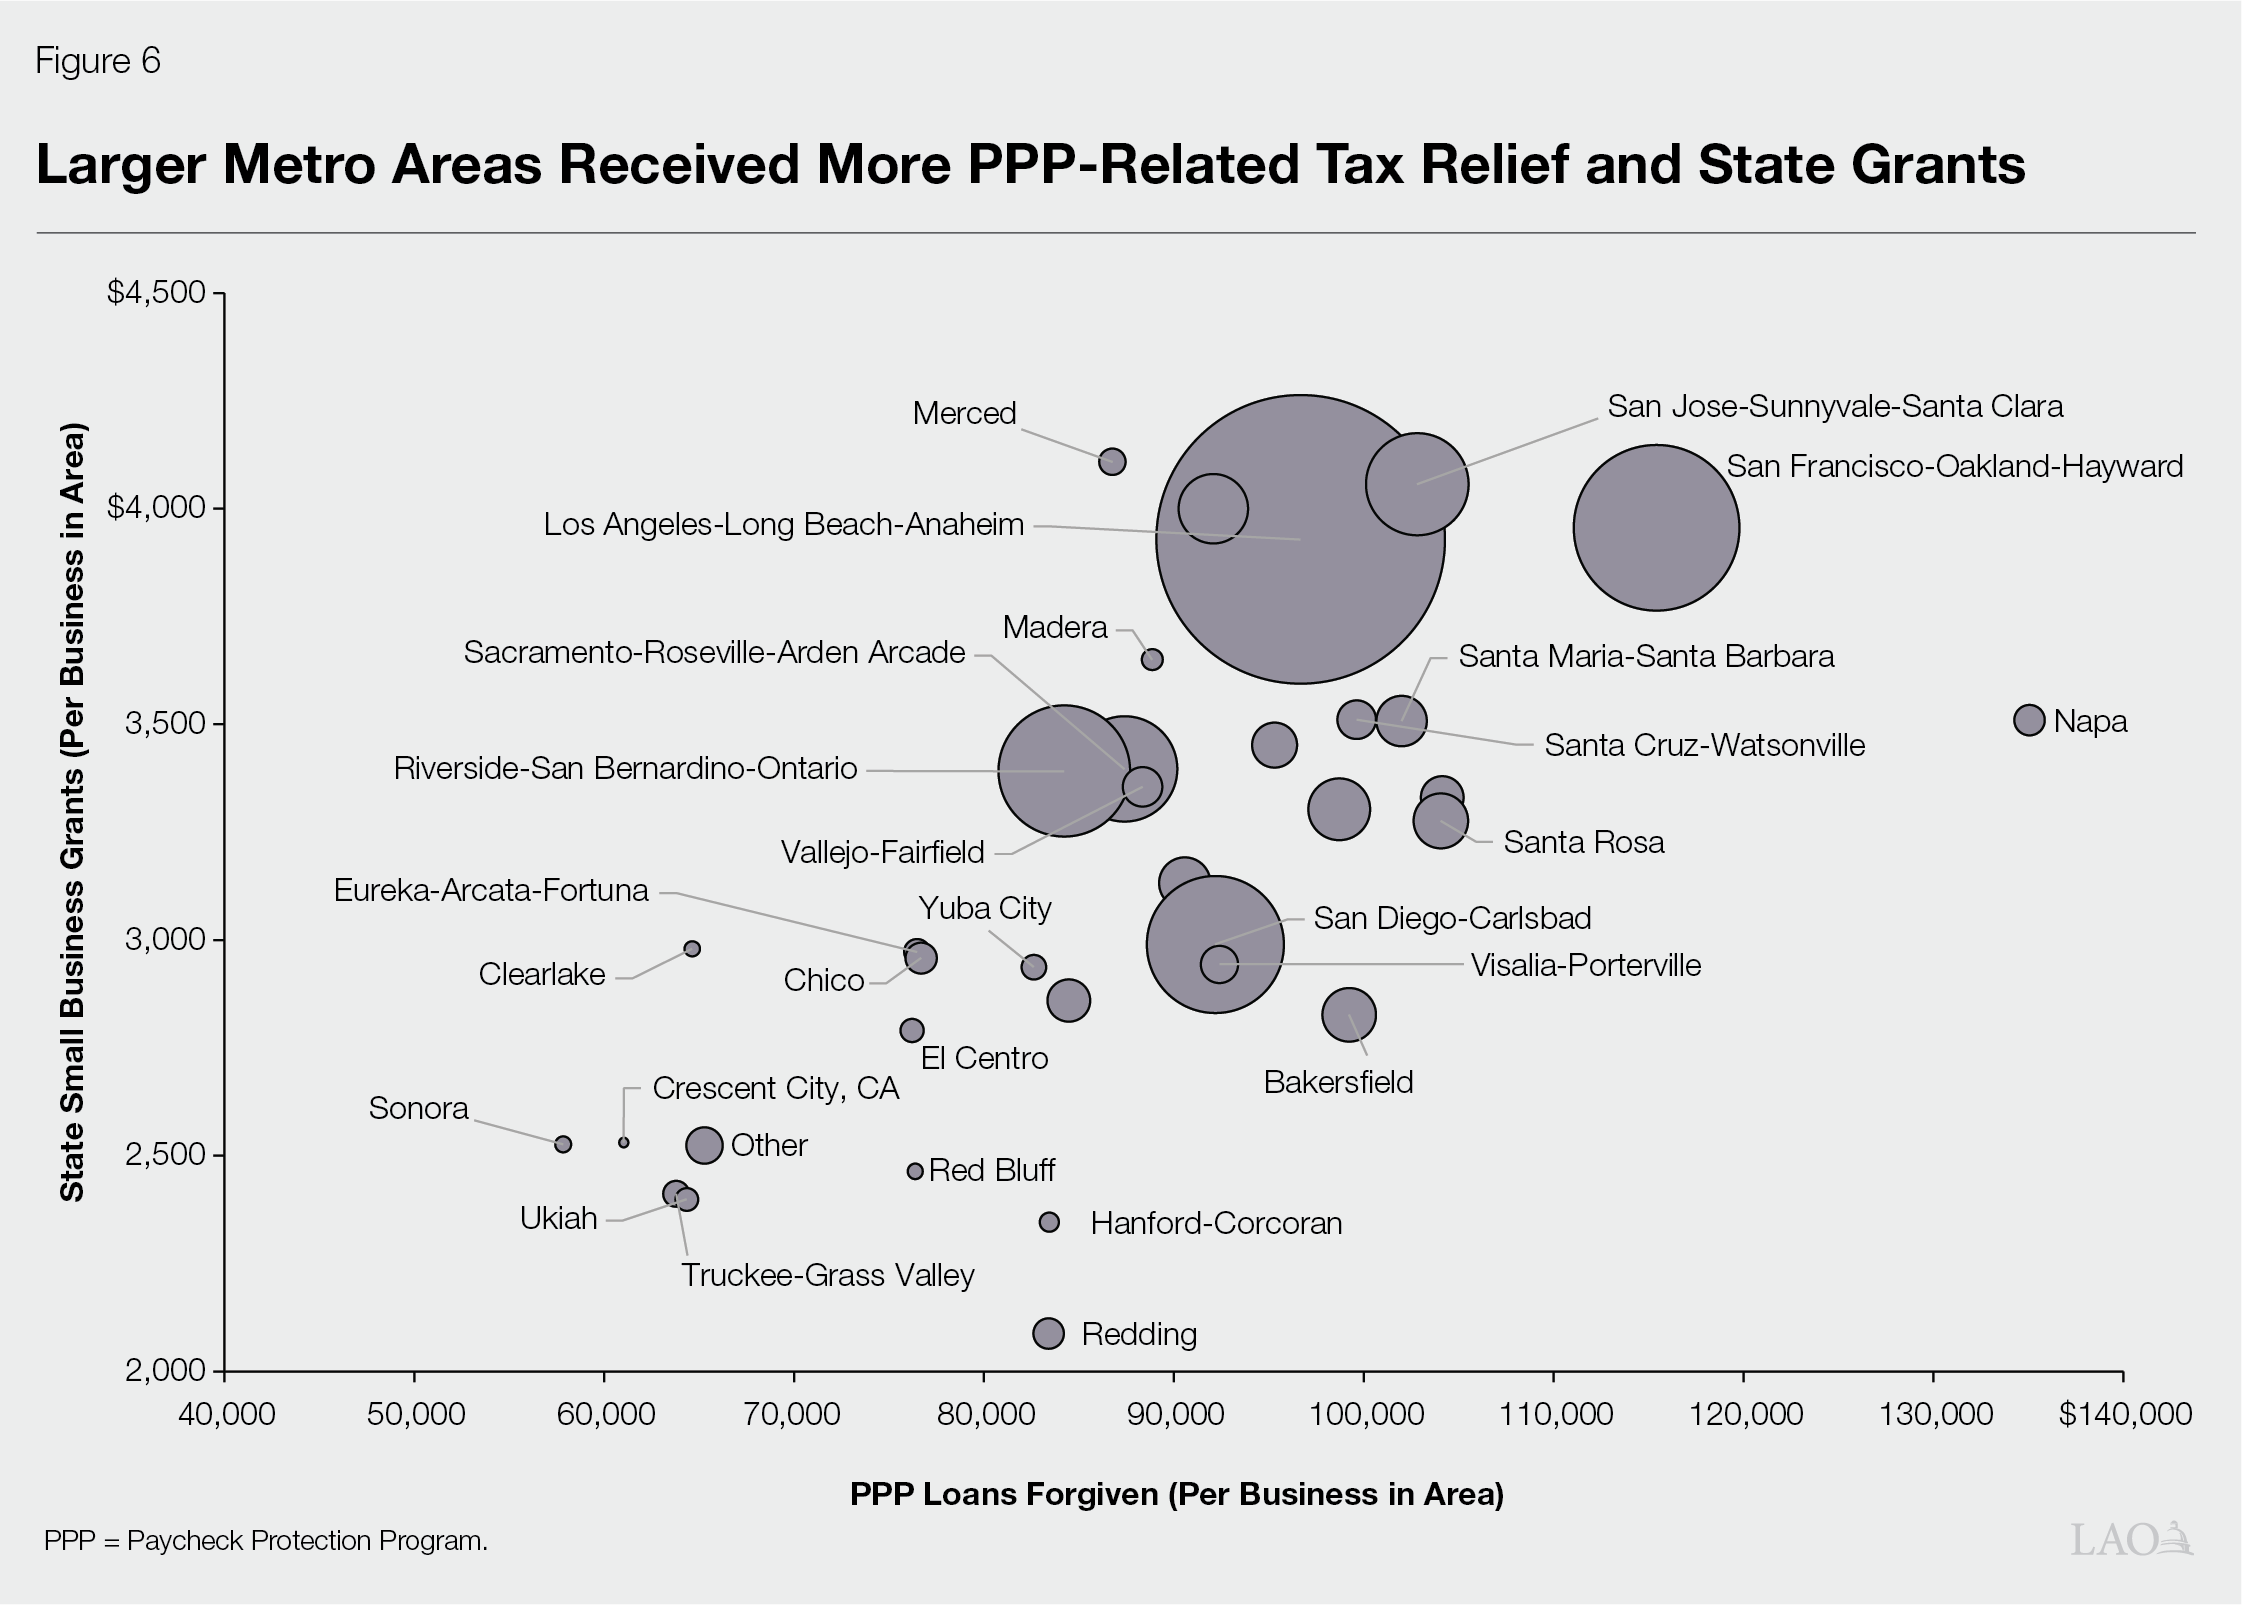 Figure 6 - Larger Metro Areas Received More PPP-Related Tax Relief and State Grants